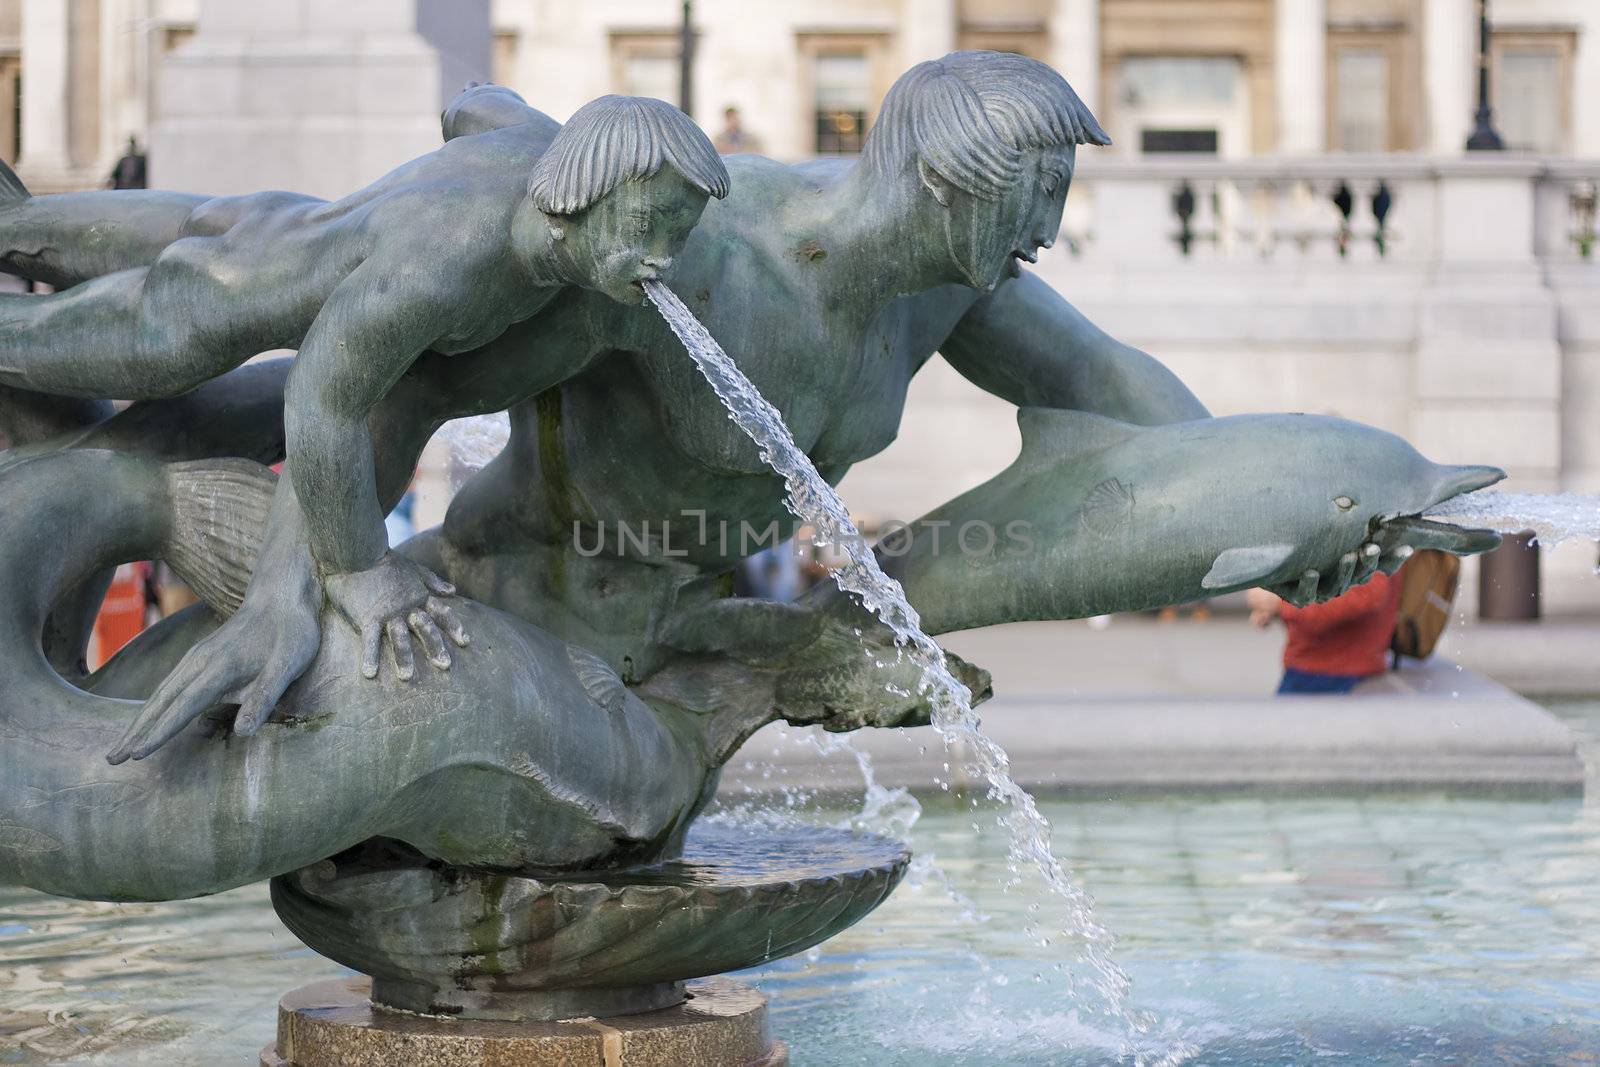 Fountain in Trafalgar Square in London representing people and dolphins